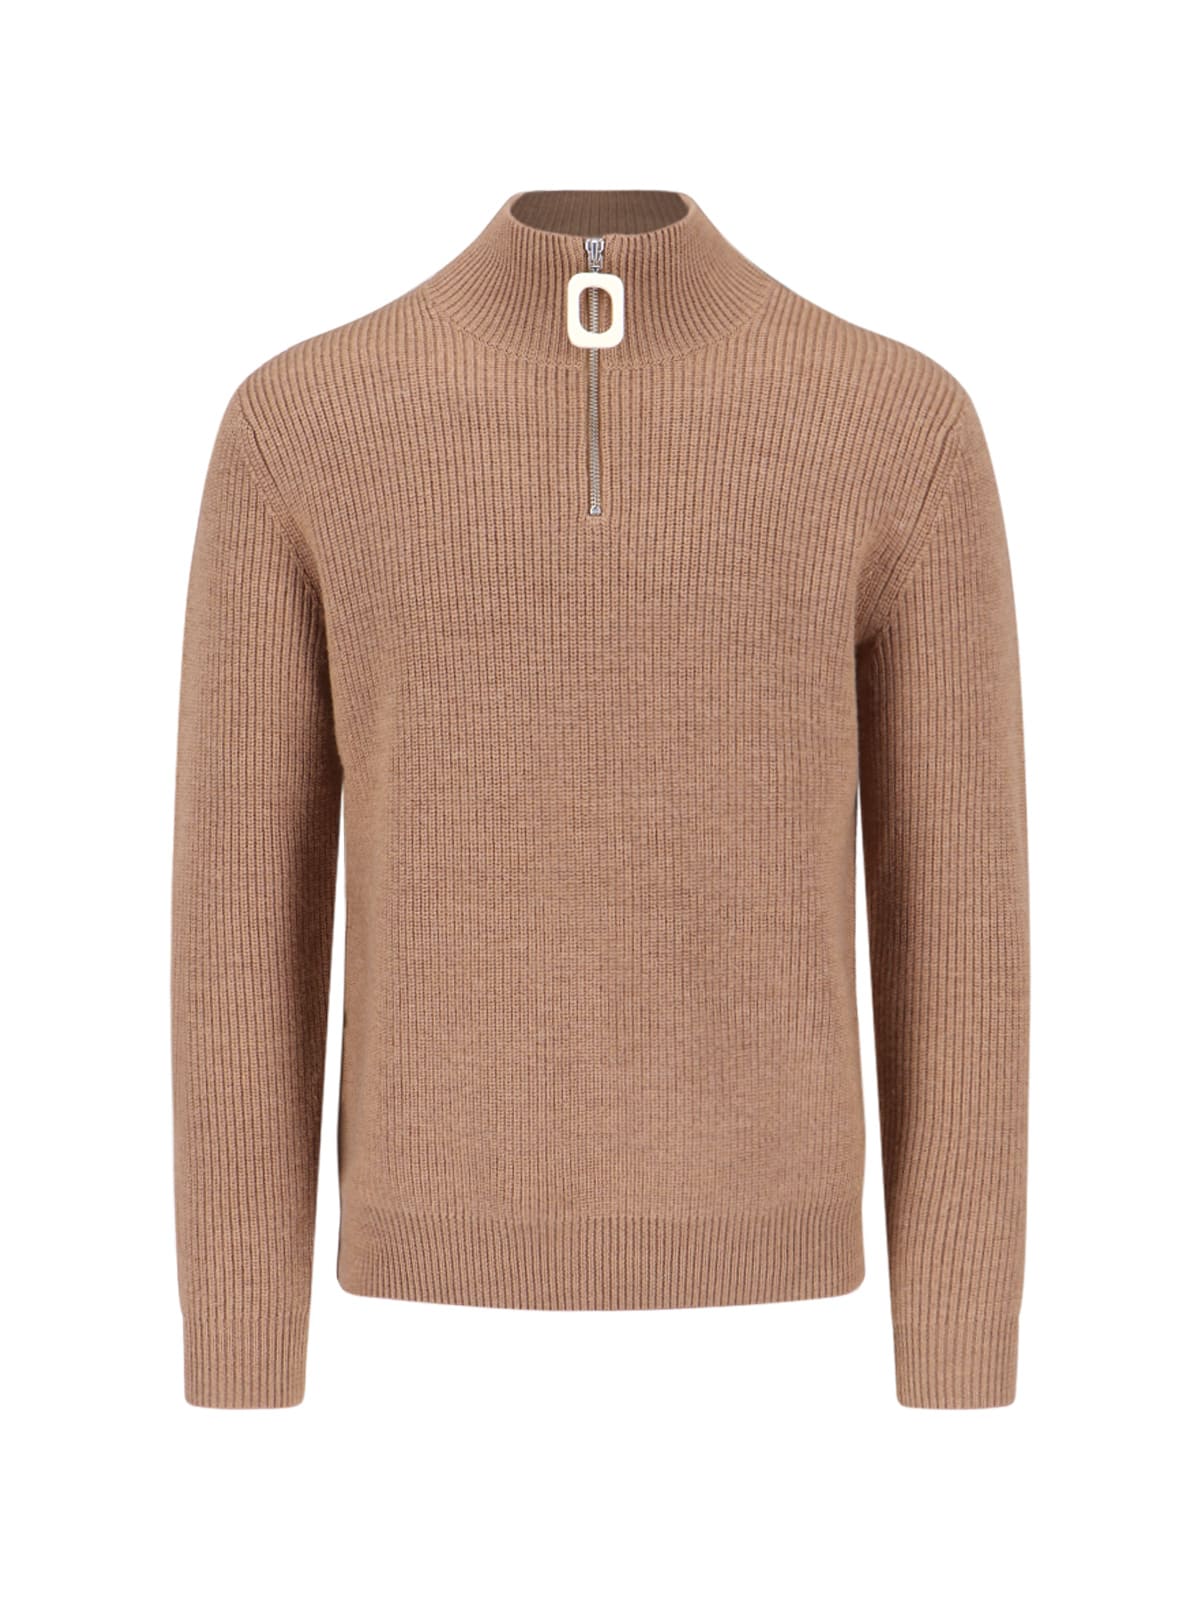 J.W. Anderson High Neck Sweater